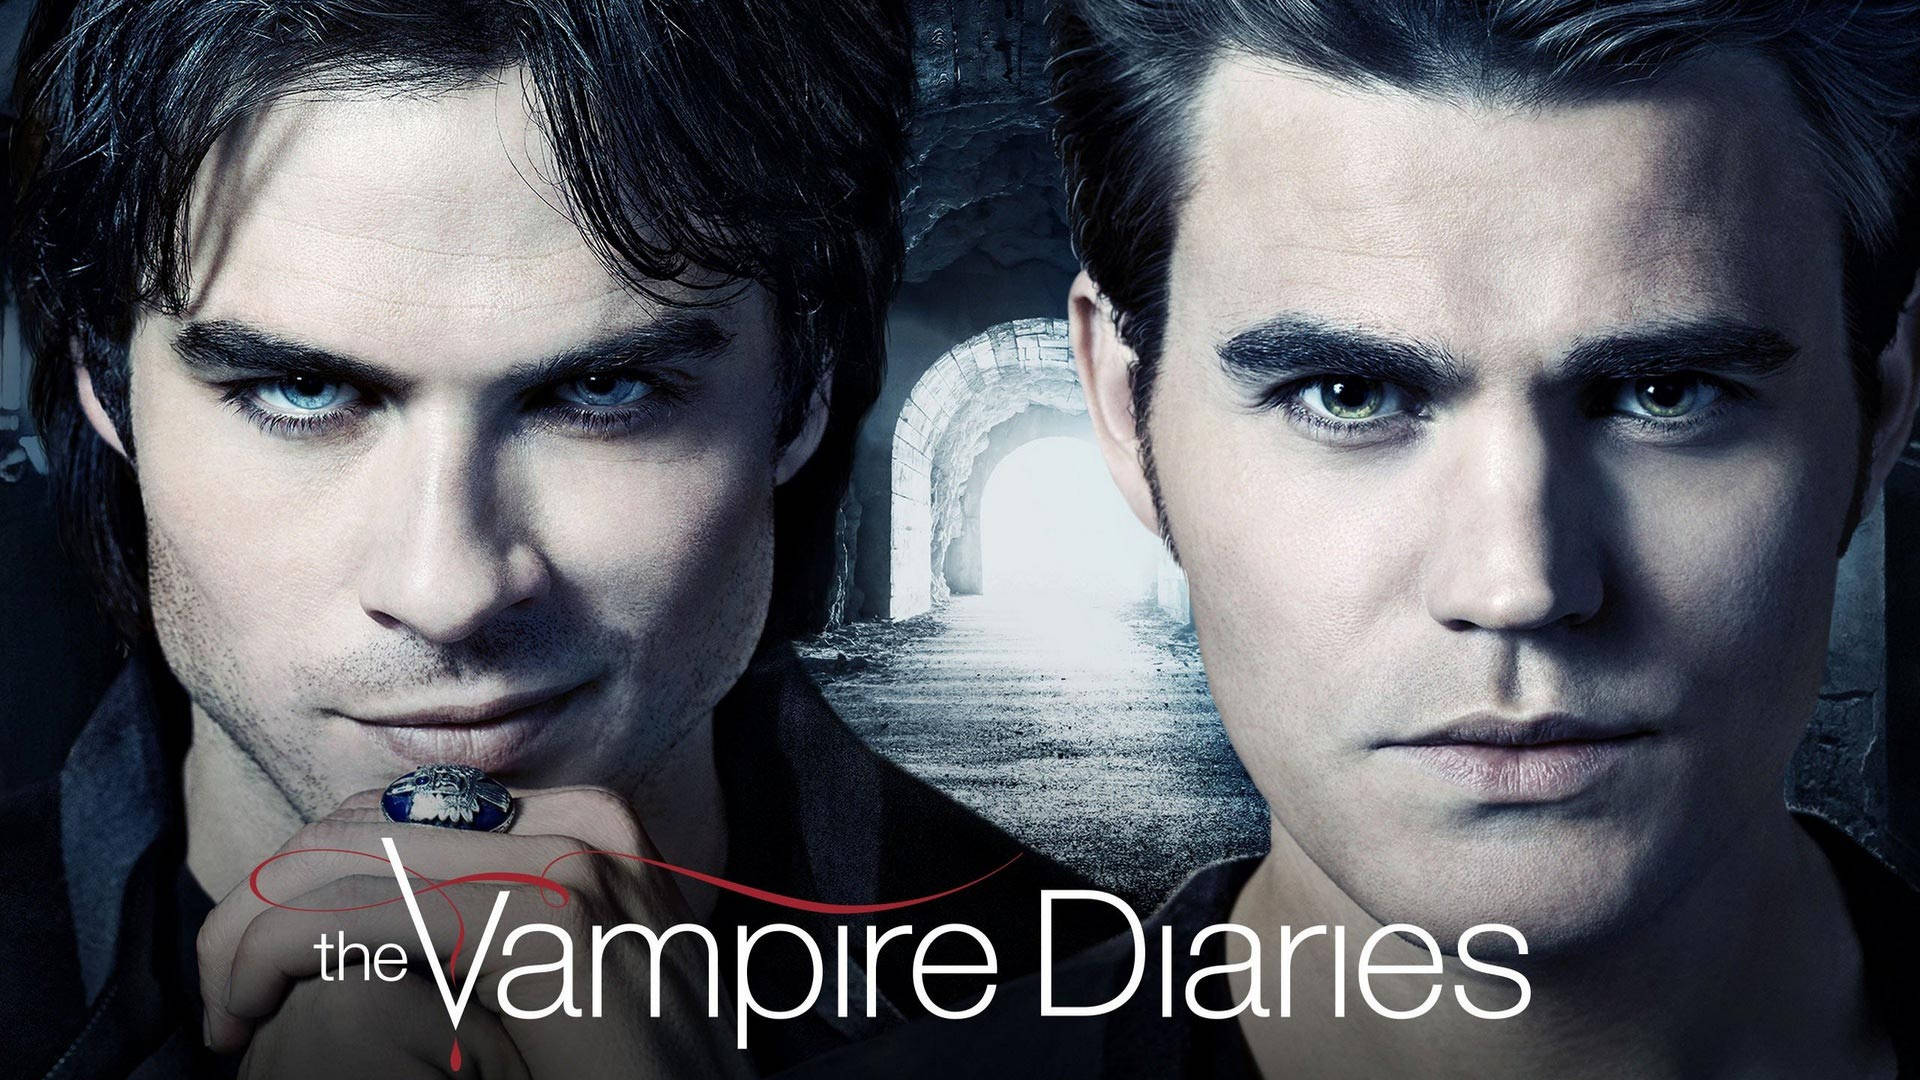 Vampirediaries Damon Och Stefan. (note: This Is Already In Swedish And Does Not Need To Be Translated As It Is The Same Phrase In Both Languages) Wallpaper